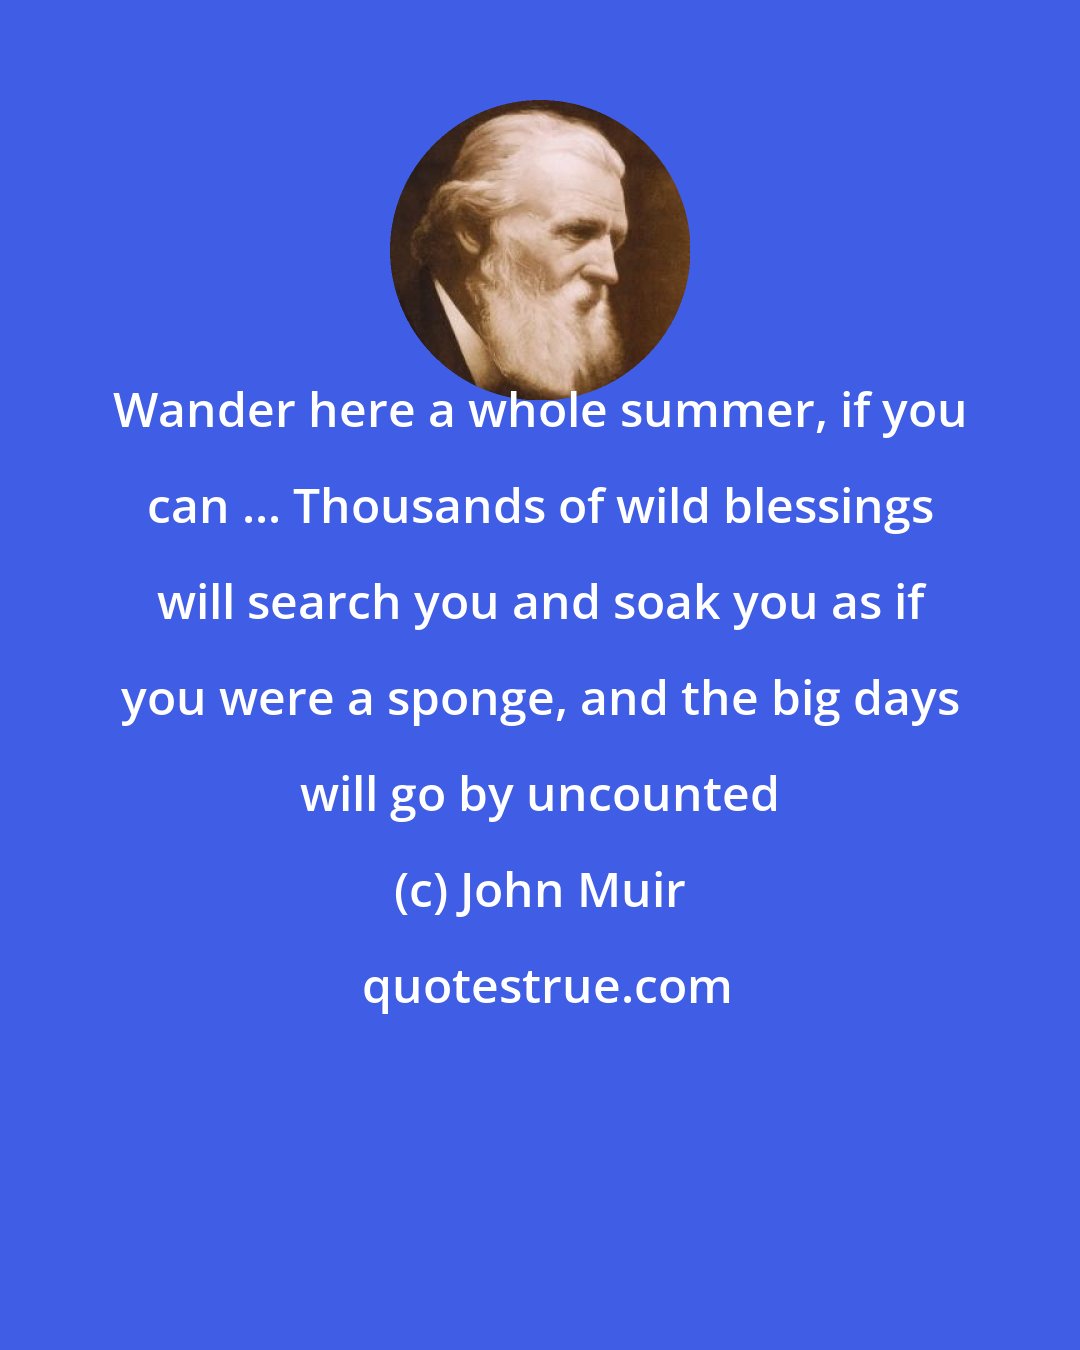 John Muir: Wander here a whole summer, if you can ... Thousands of wild blessings will search you and soak you as if you were a sponge, and the big days will go by uncounted